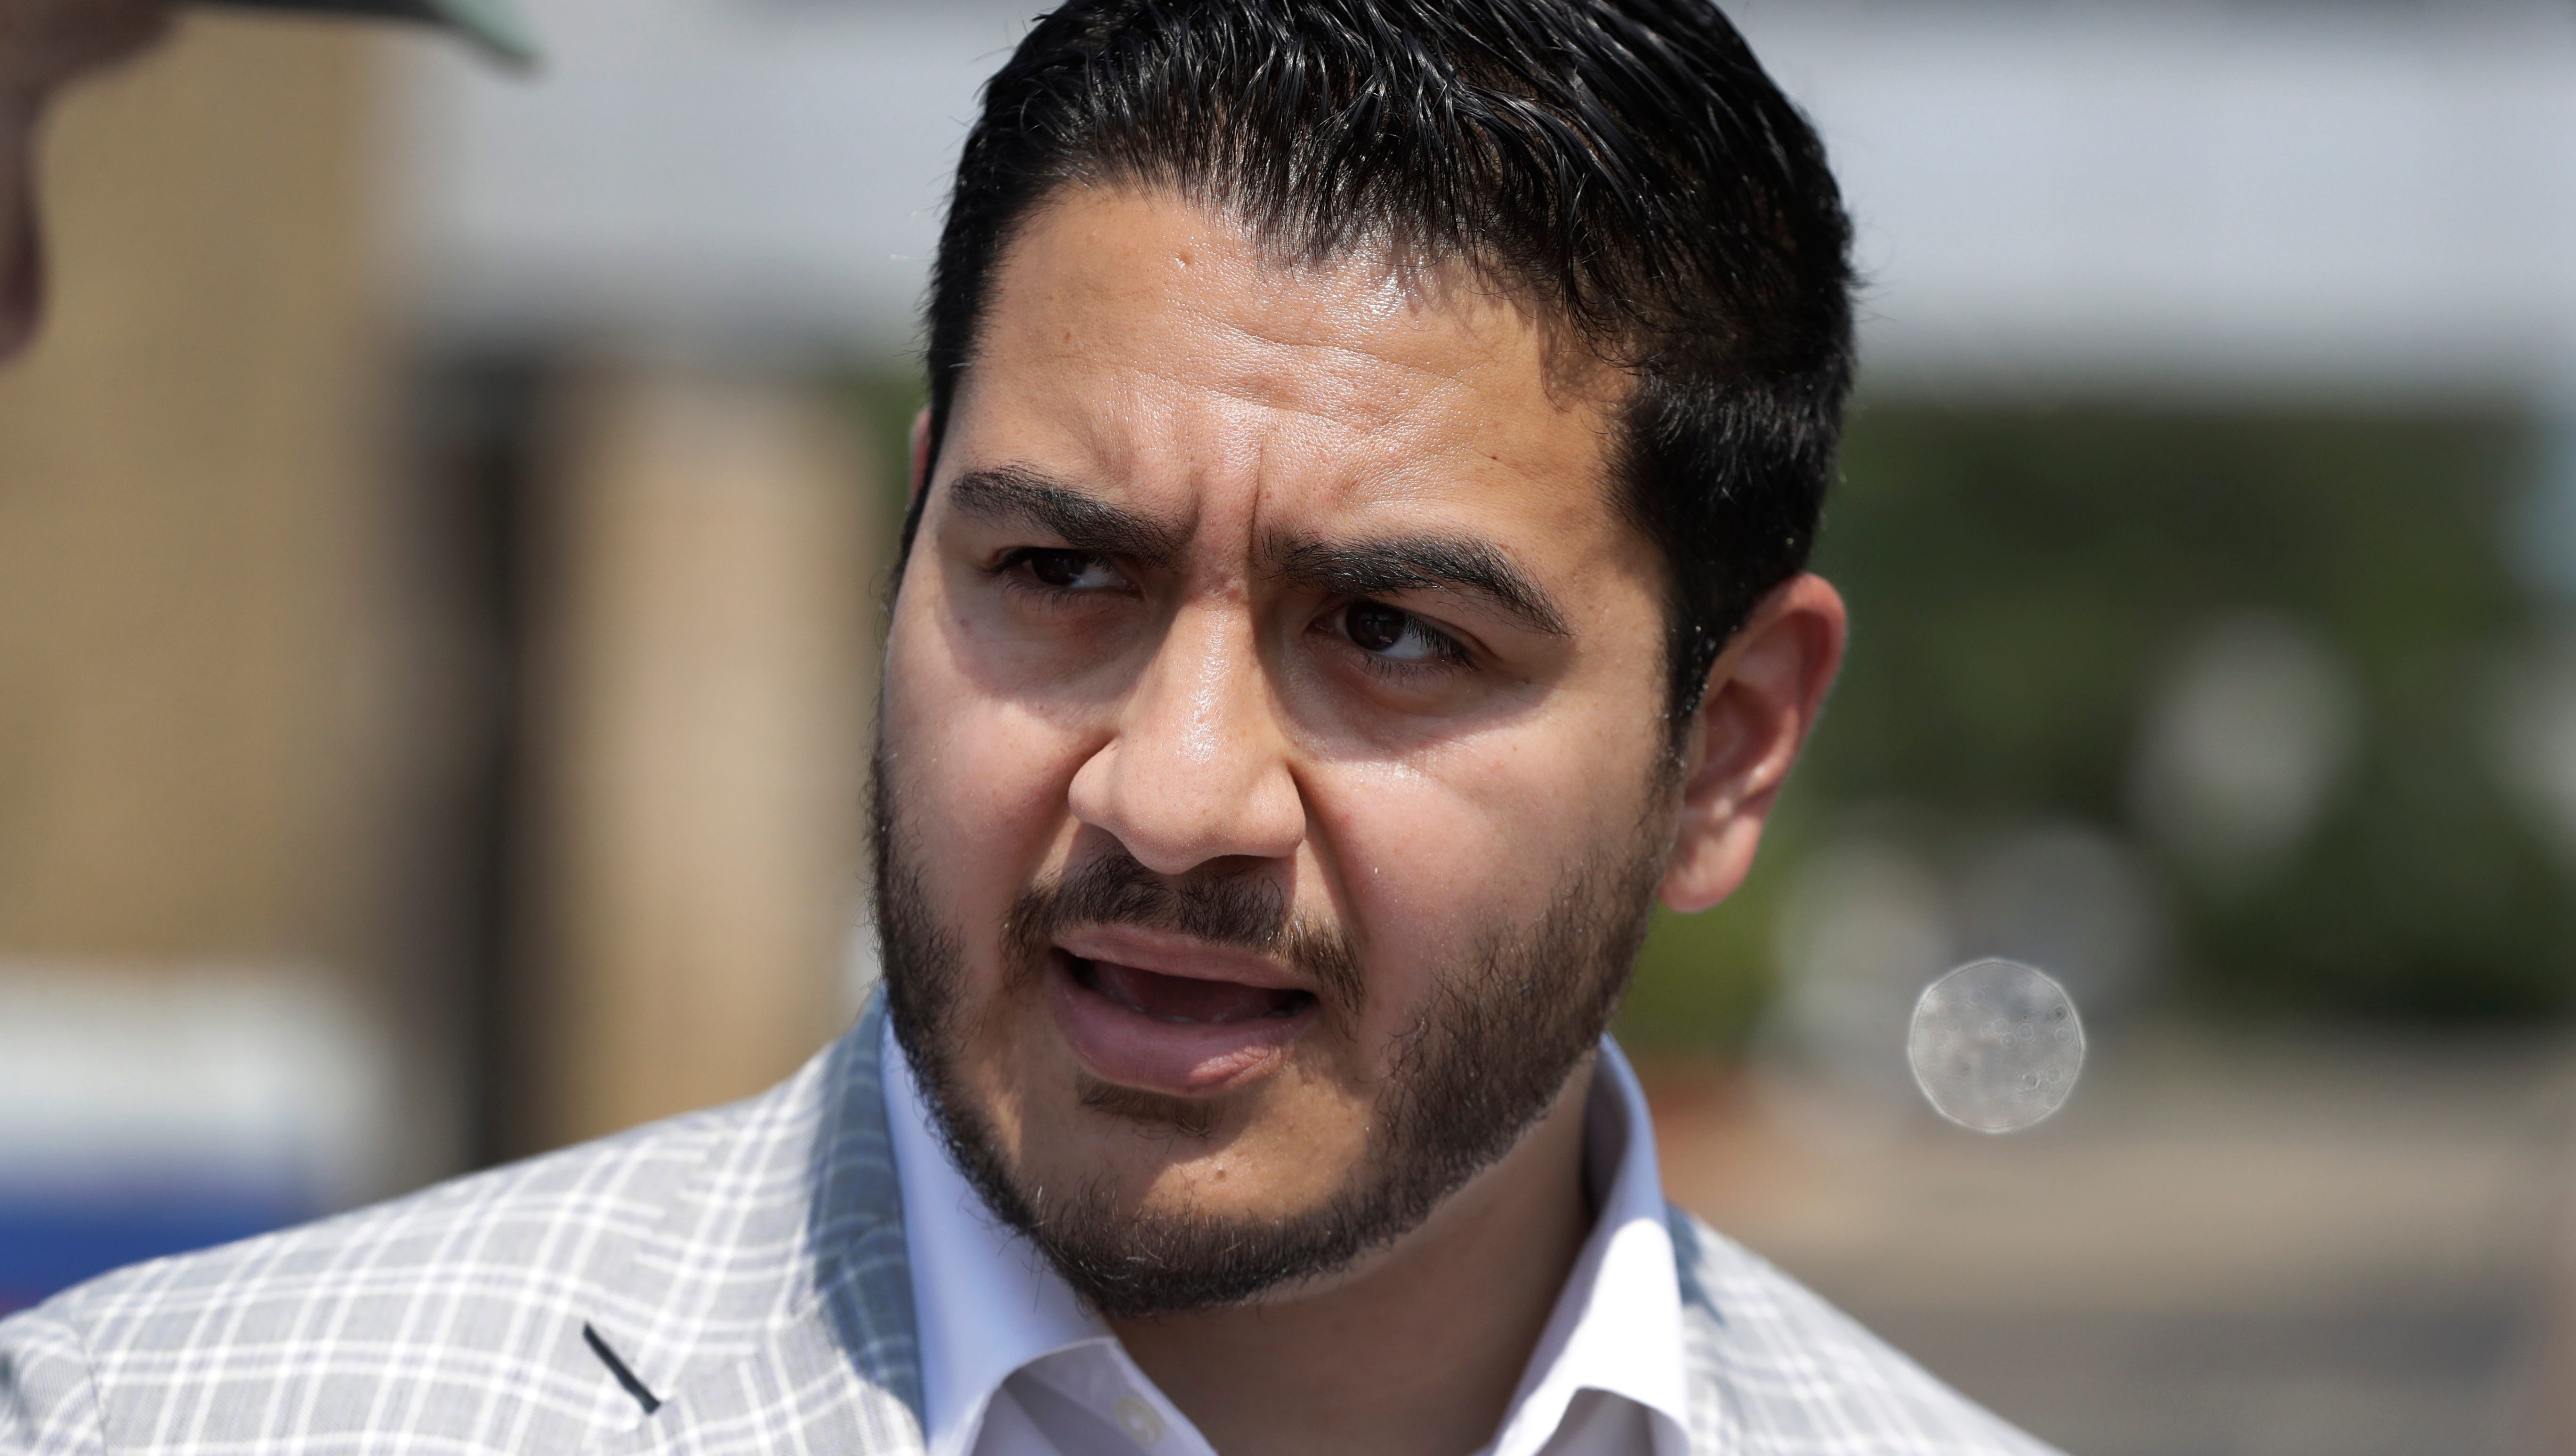 Democratic gubernatorial hopeful Abdul El-Sayed has been embracing his outsider status, including at the Mackinac Policy Conference.